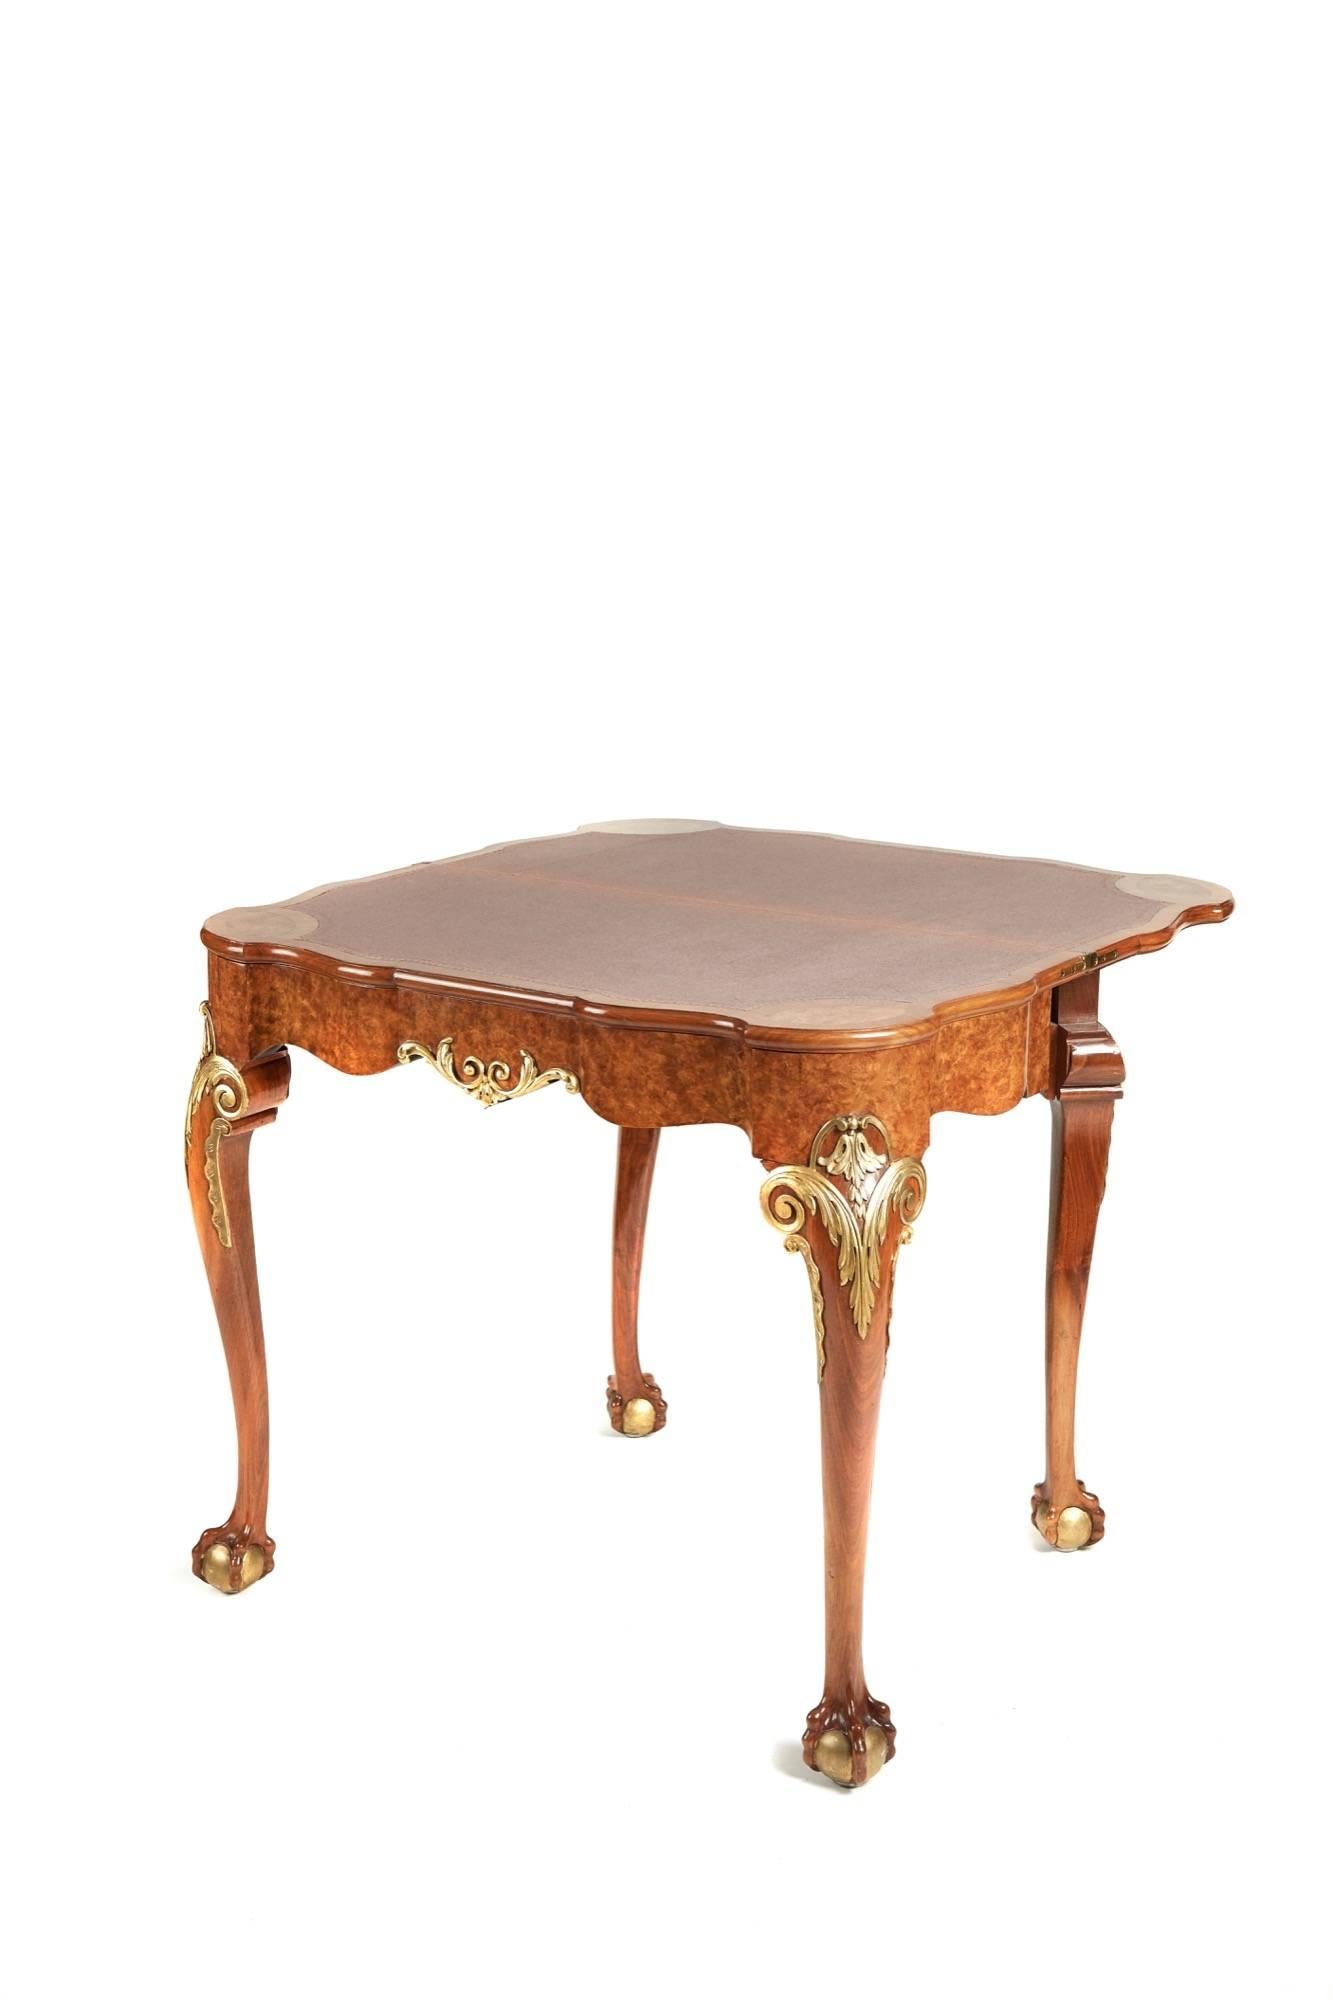 A George II style burr walnut and giltwood card table, the shaped burr walnut top opens to reveal a baize interior, lovely shaped burr walnut and carved giltwood frieze, with acanthus carved knees and cabriole legs on giltwood claw and ball